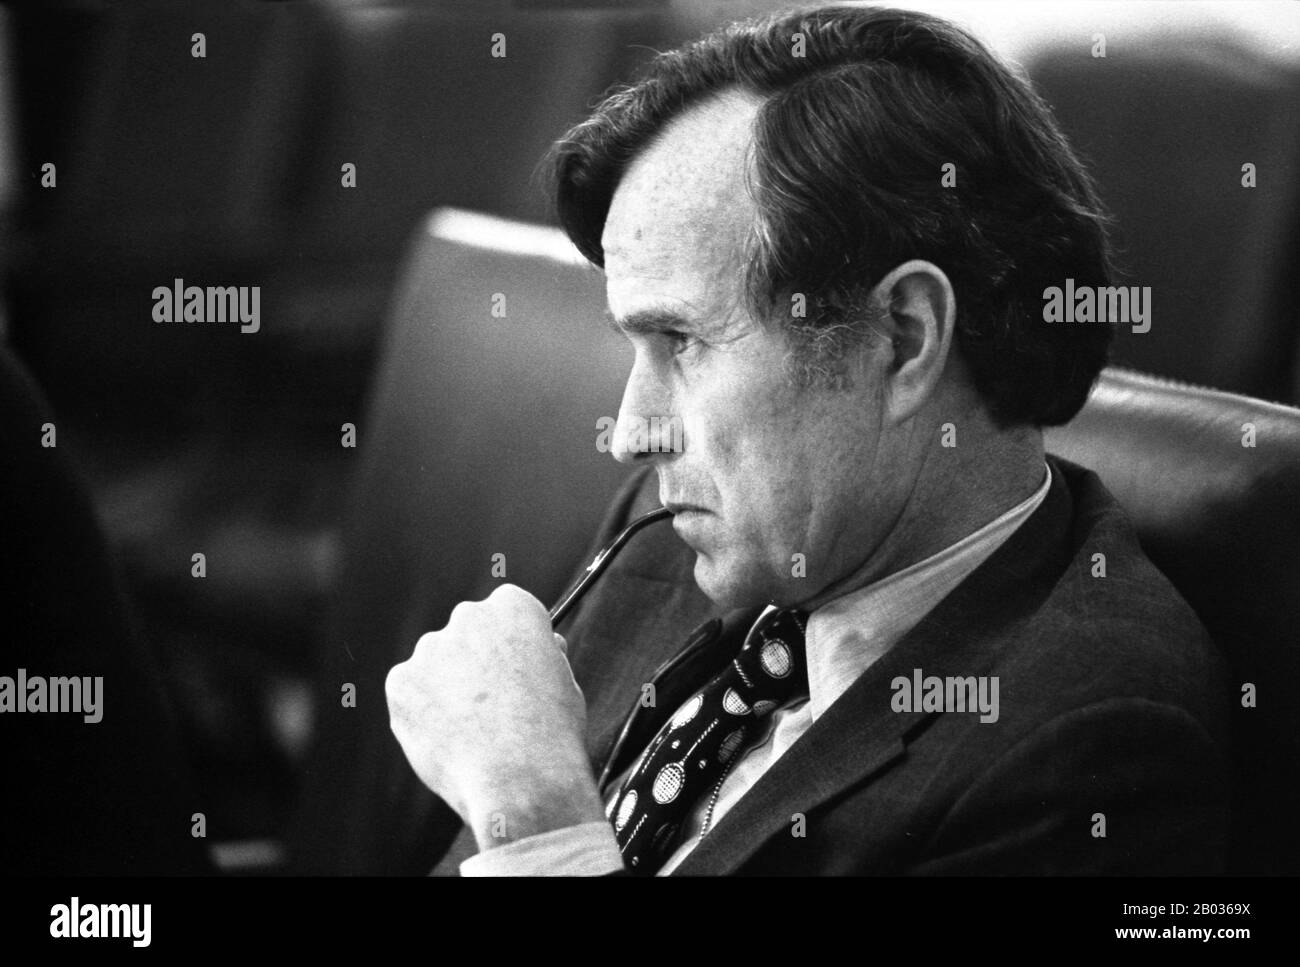 George Herbert Walker Bush (born June 12, 1924) is an American politician who was the 41st President of the United States from 1989 to 1993 and the 43rd Vice President of the United States from 1981 to 1989.  A member of the U.S. Republican Party, he was previously a congressman, ambassador, and Director of Central Intelligence. Stock Photo